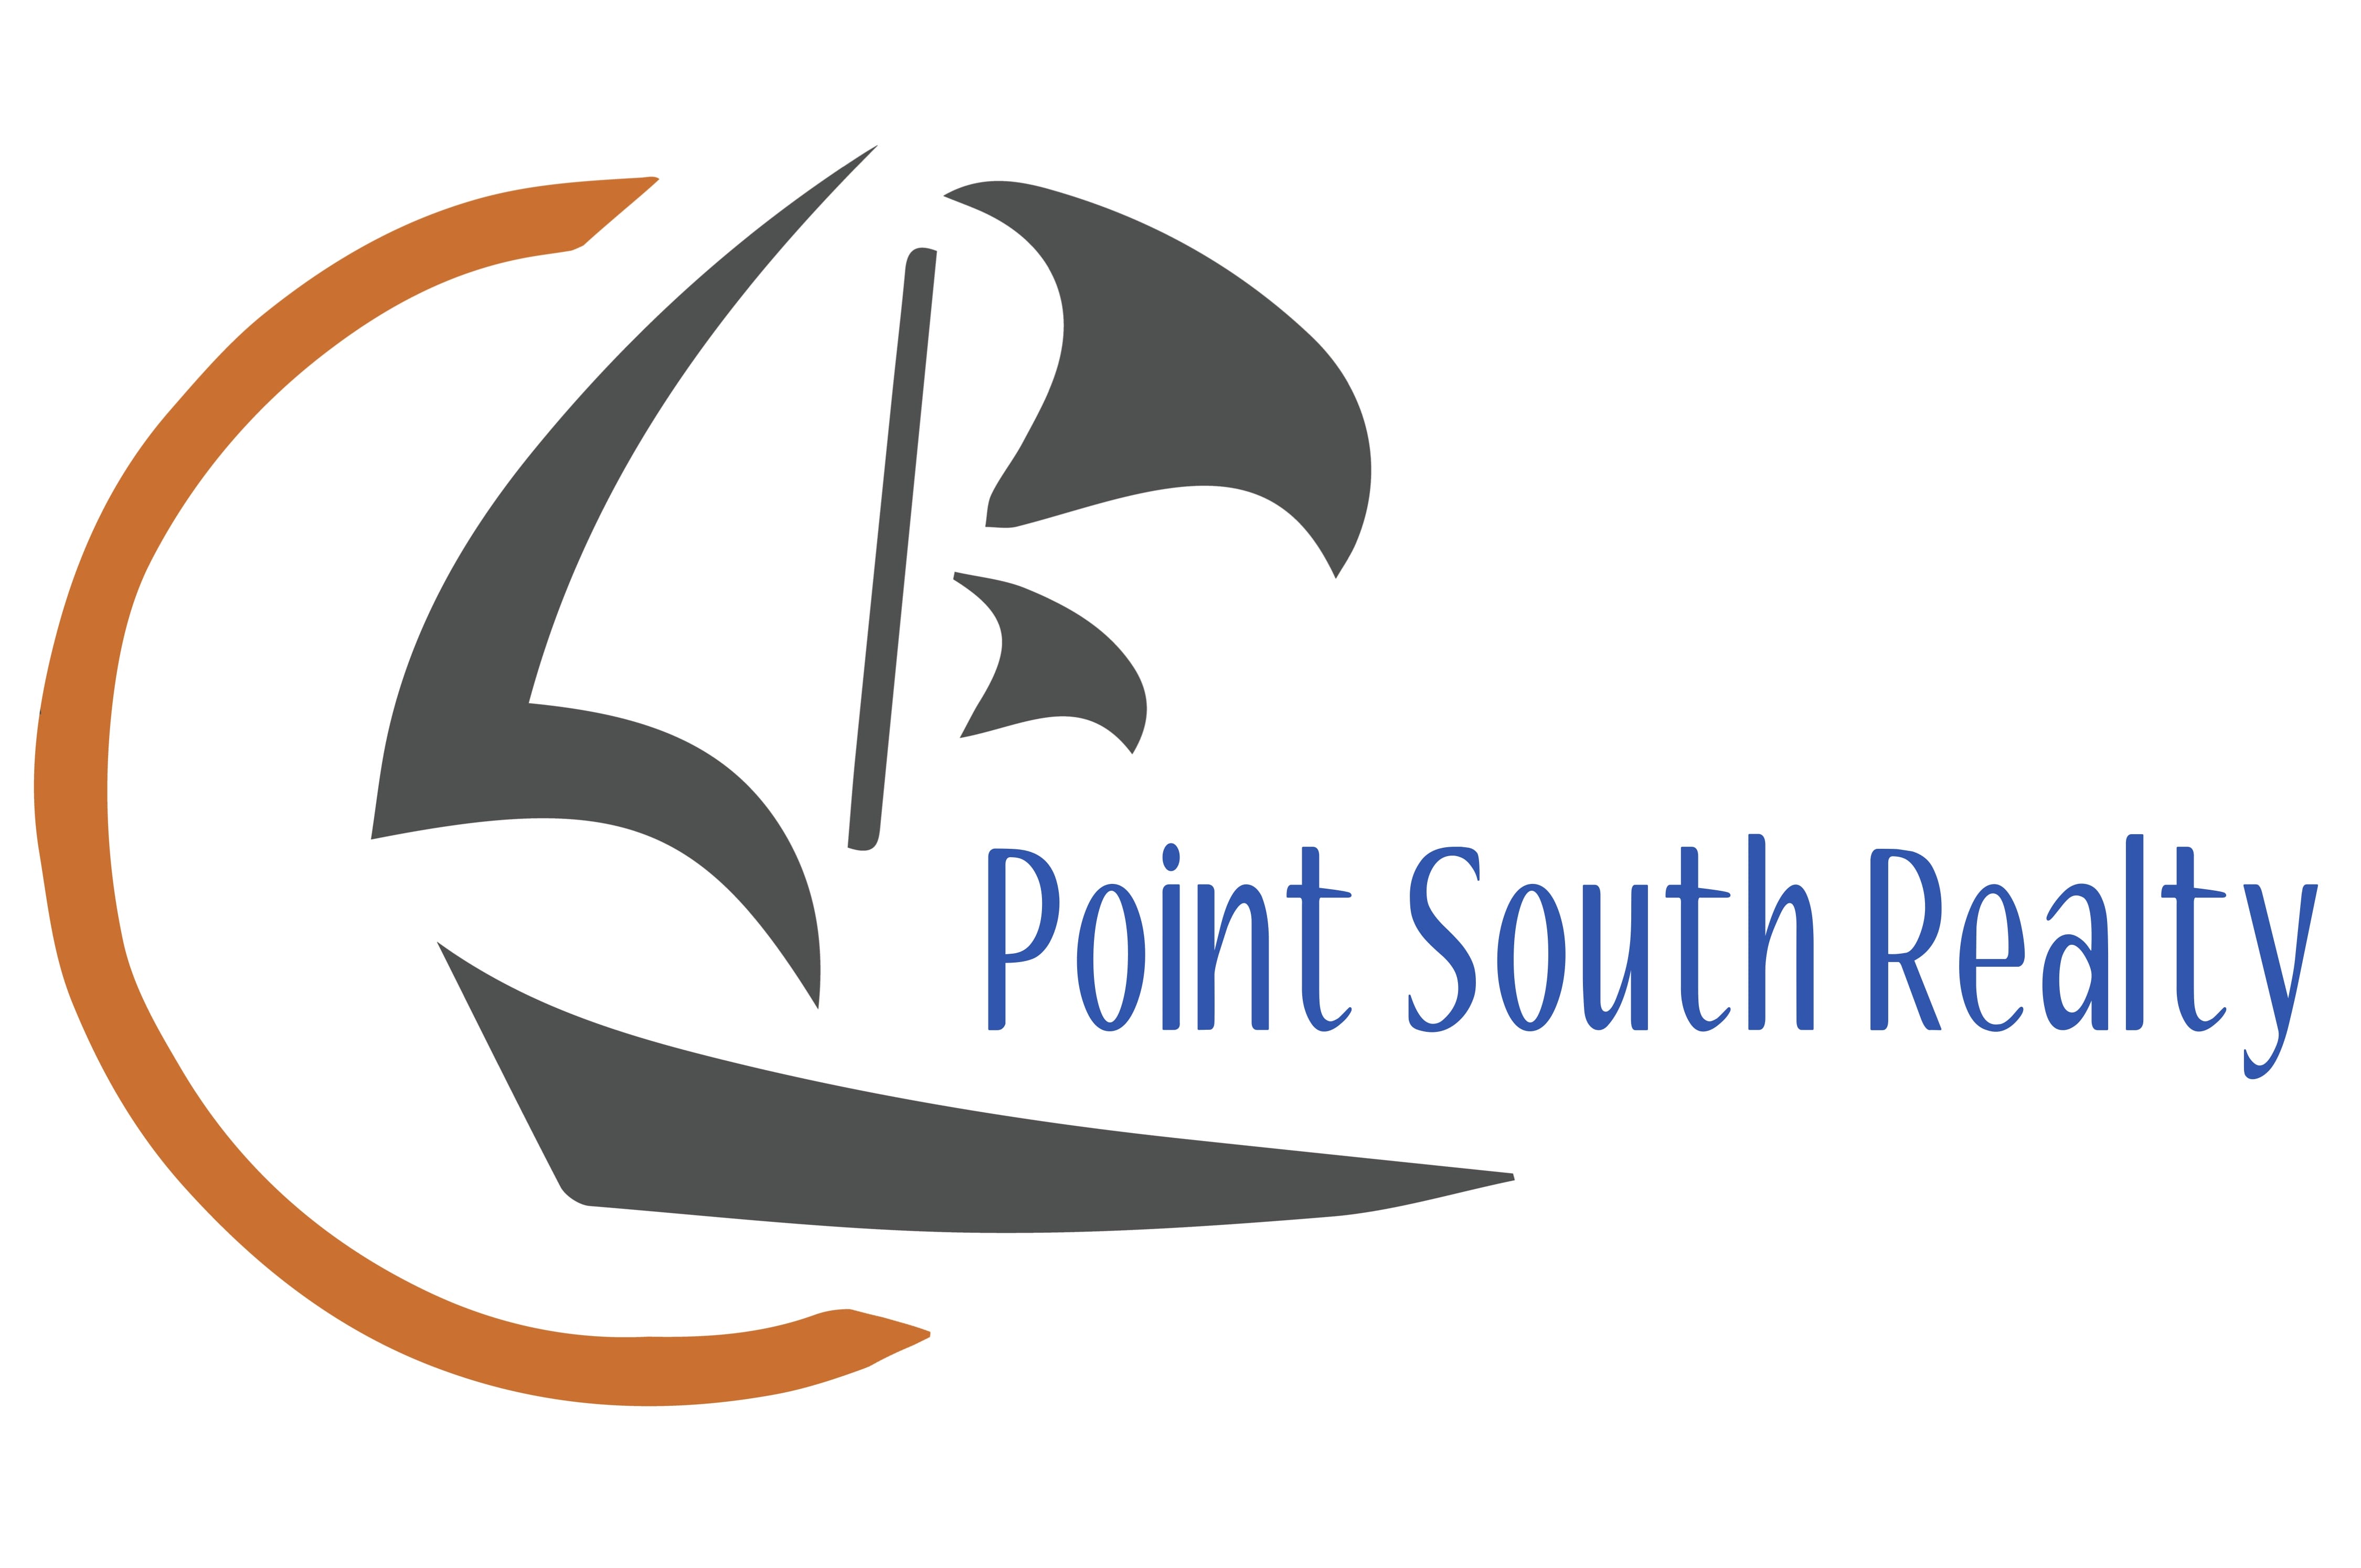 Point South Realty